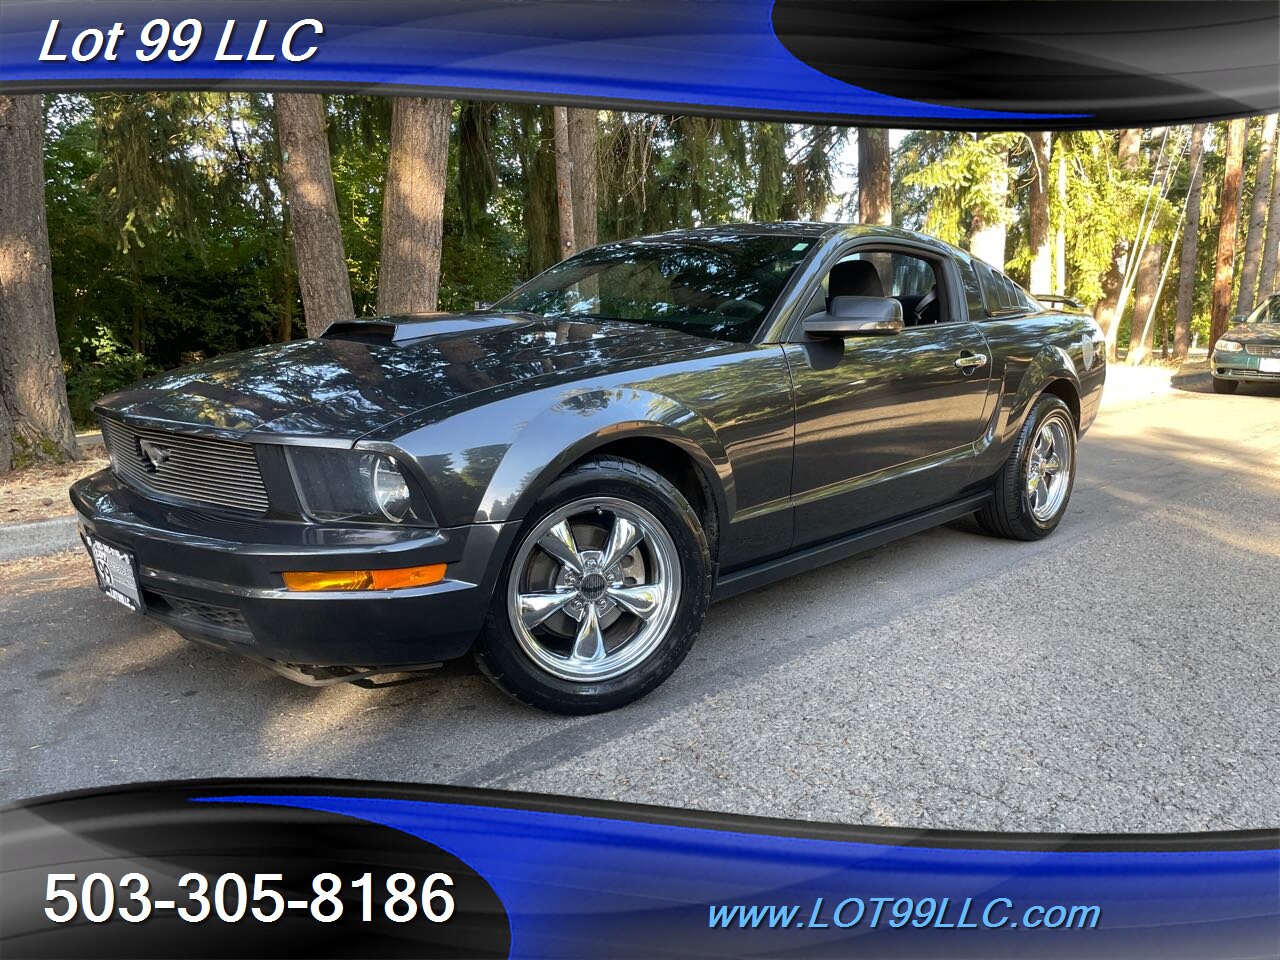 2008 Ford Mustang 89k Miles 4.0L V6 210hp 5 Speed Manual 26 MPG   - Photo 2 - Milwaukie, OR 97267